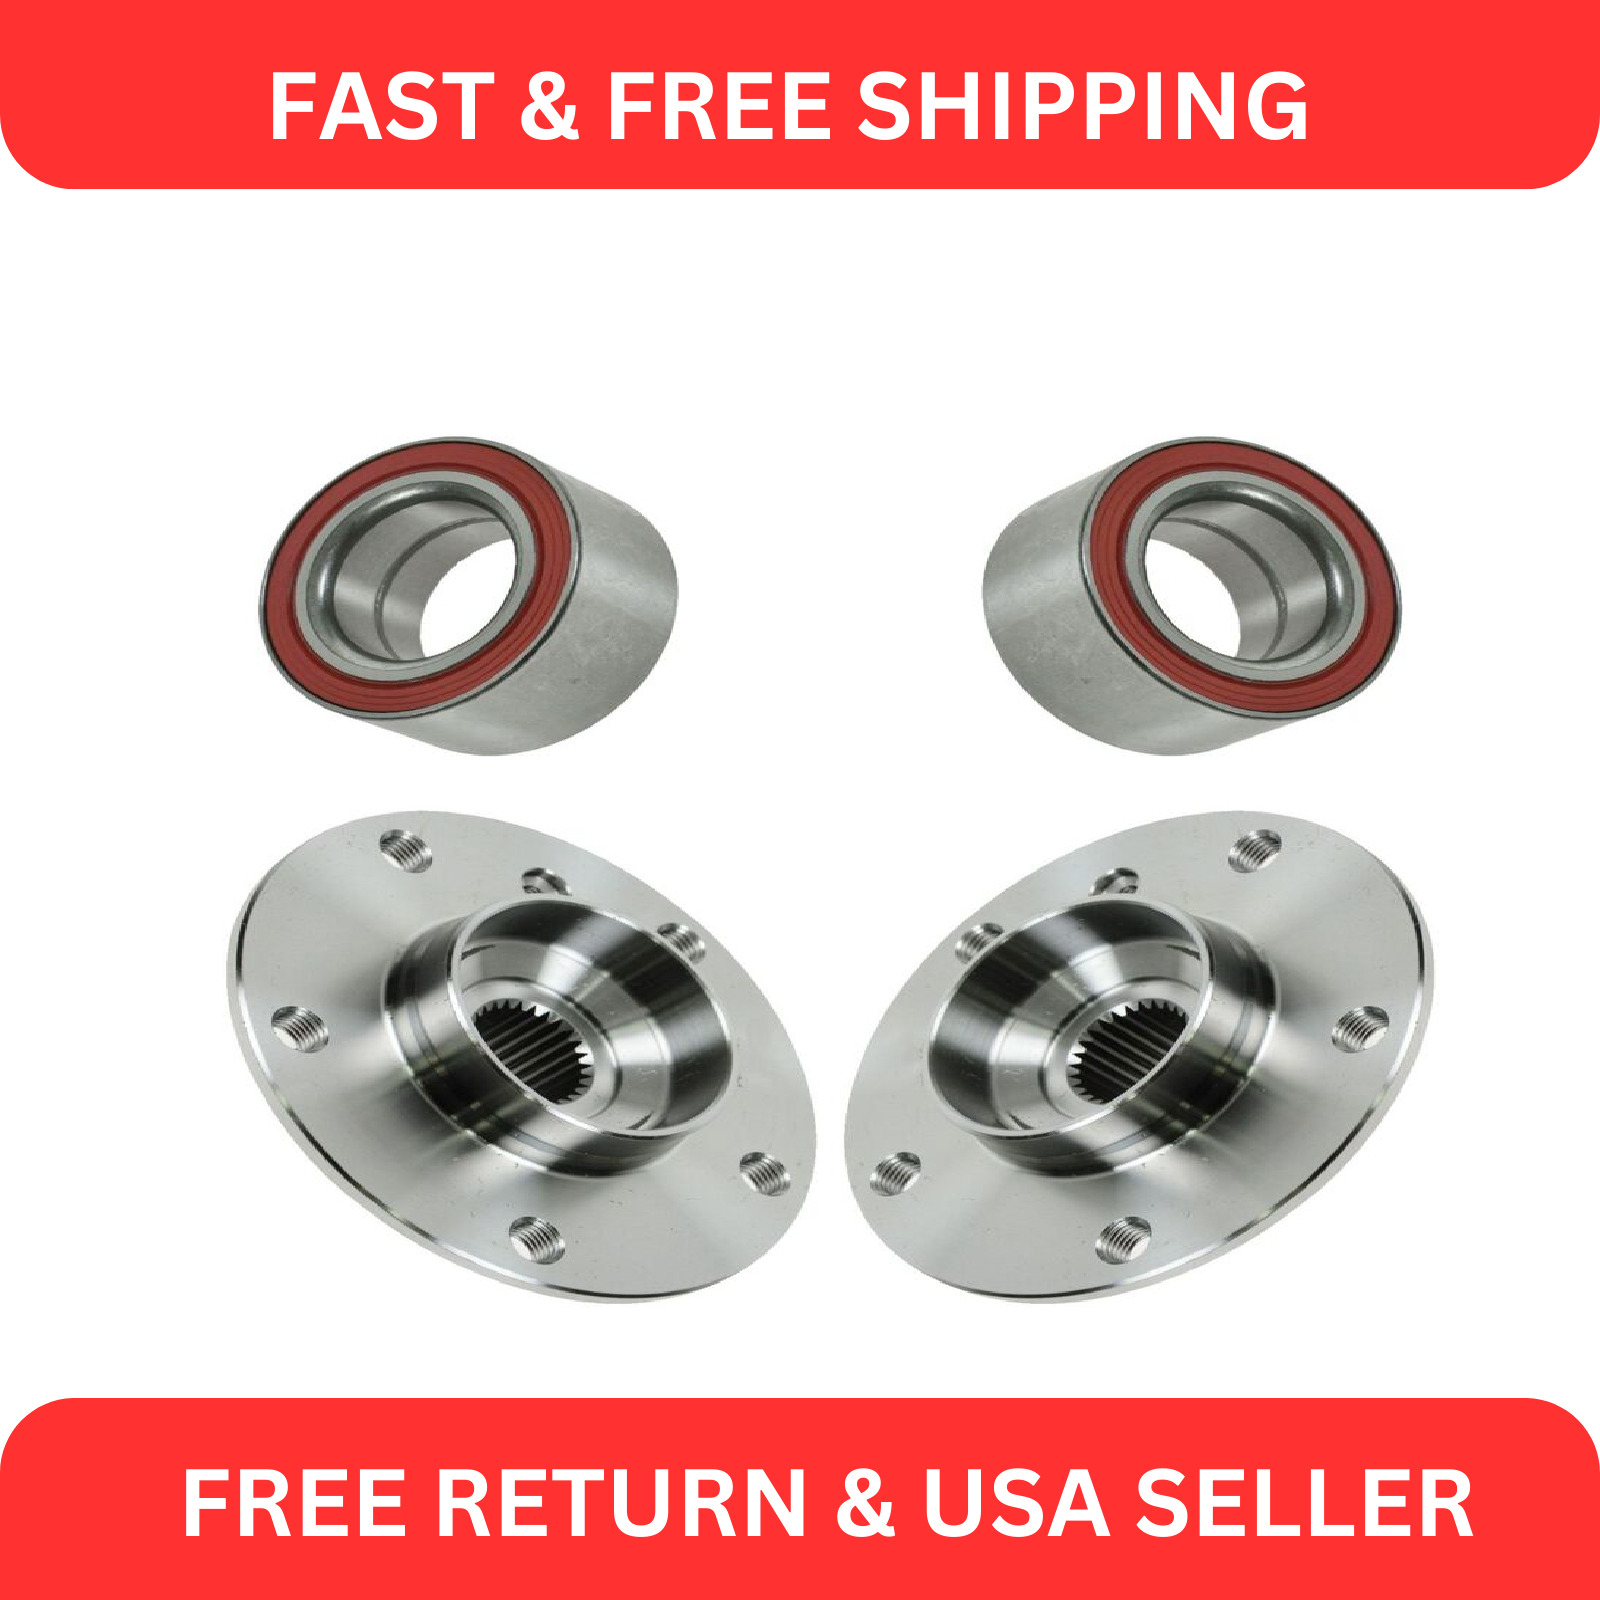 Rear Wheel Bearing & Hub For BMW E36 E46 3 Series iS iC Ci I Left and Right